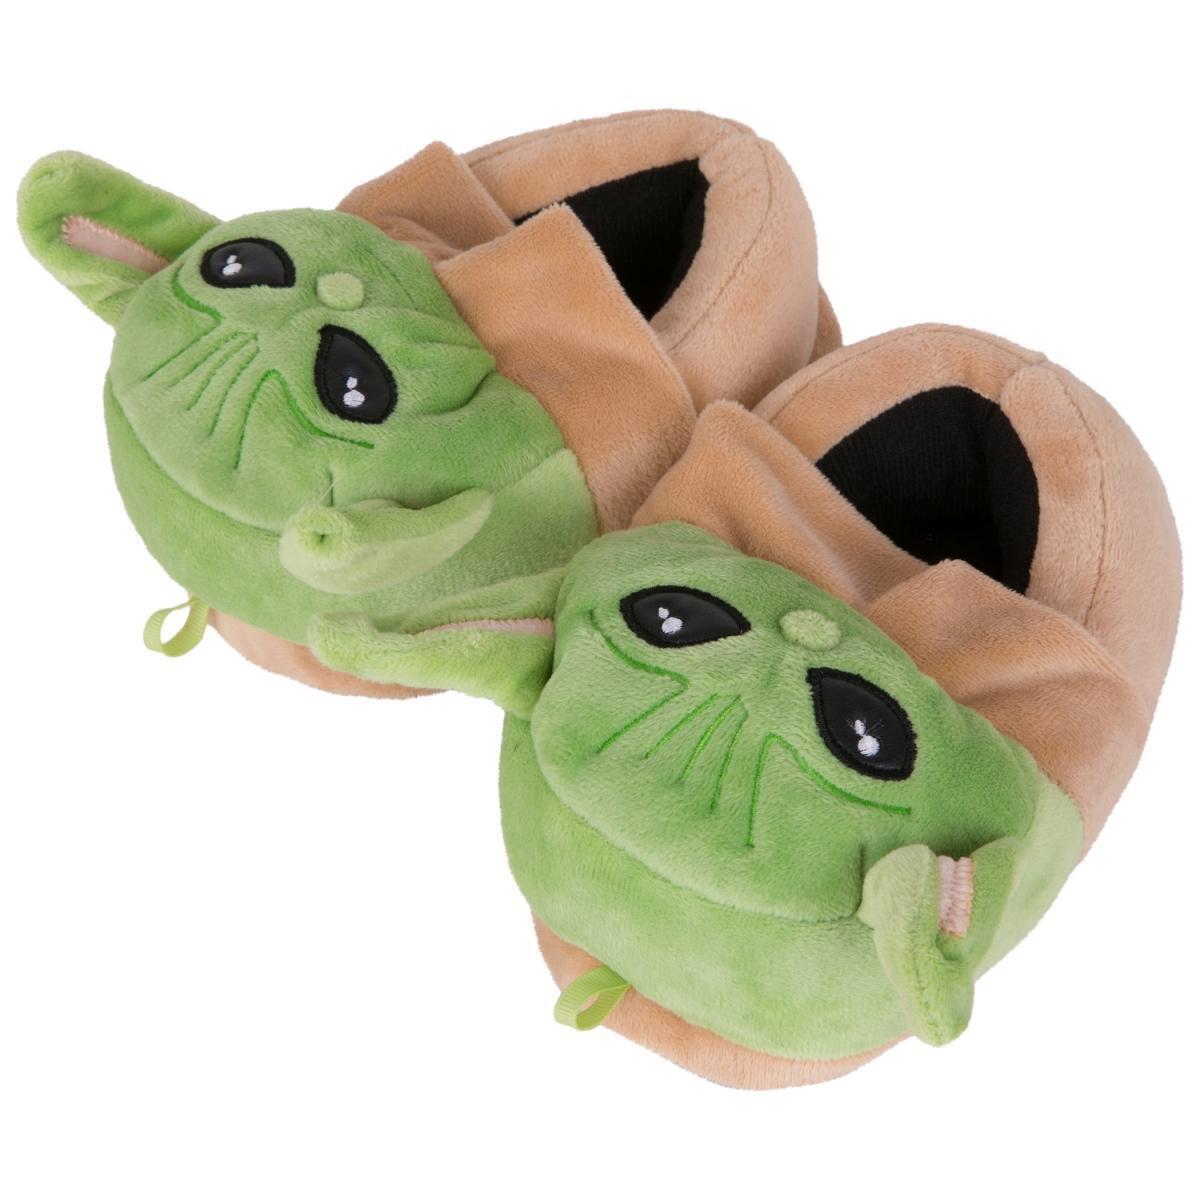 Star Wars 870839-size5-6 The Mandalorian Grogu Youth Boys Slippers, Multi Color - Size 5-6